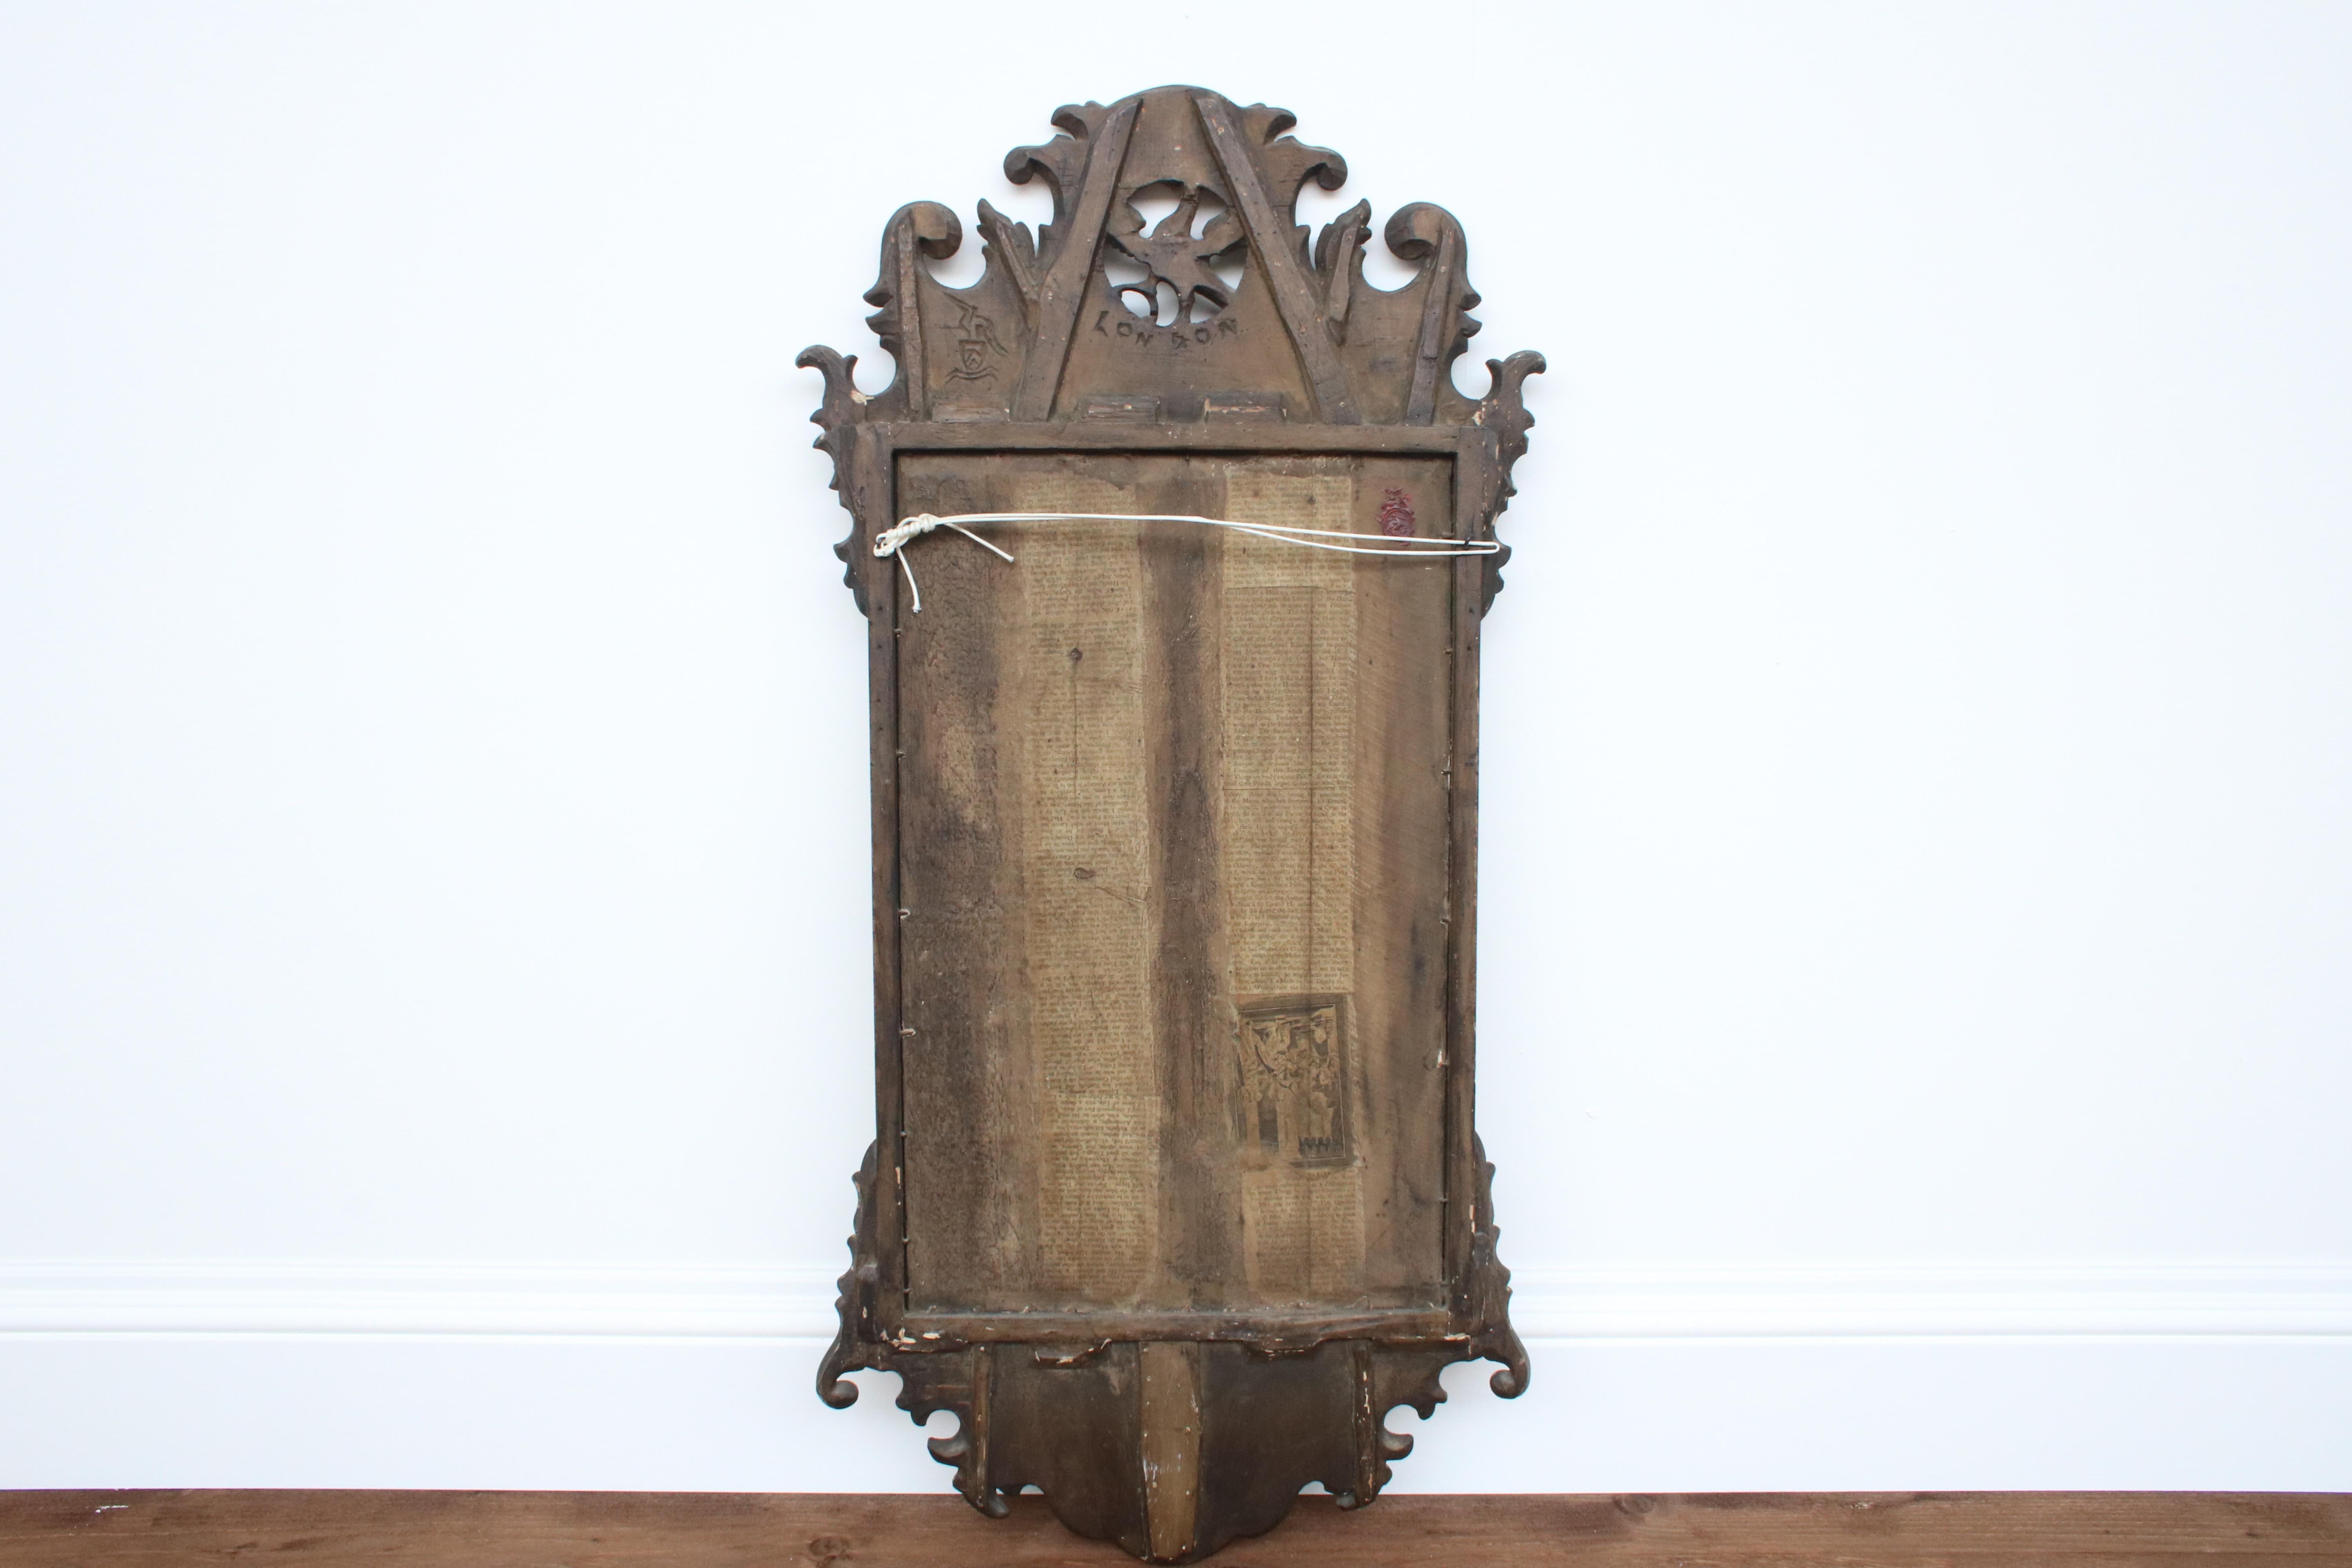 Rare 18th century George II wall mirror with walnut veneer fretwork frame and gilt detail to the inner frame and Hoho bird carved in the center top. The original mirror plate is in excellent condition.

A fantastic decorative item in truly